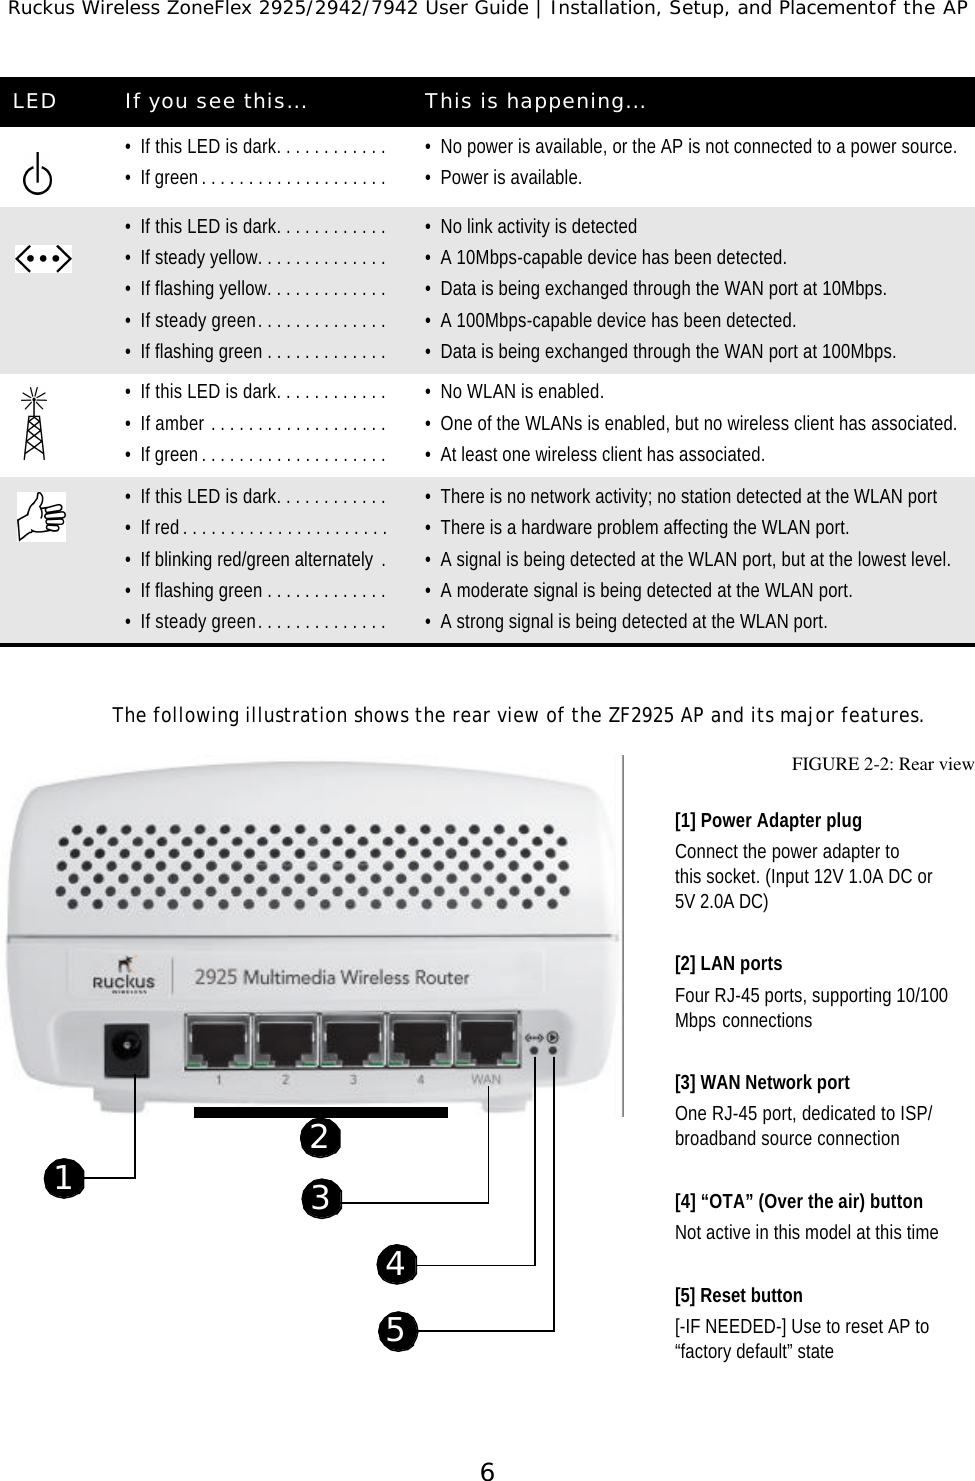 Ruckus Wireless ZoneFlex 2925/2942/7942 User Guide | Installation, Setup, and Placementof the AP6The following illustration shows the rear view of the ZF2925 AP and its major features. LED If you see this... This is happening...•If this LED is dark. . . . . . . . . . . . •If green . . . . . . . . . . . . . . . . . . . . •No power is available, or the AP is not connected to a power source.•Power is available.•If this LED is dark. . . . . . . . . . . . •If steady yellow. . . . . . . . . . . . . . •If flashing yellow. . . . . . . . . . . . . •If steady green . . . . . . . . . . . . . . •If flashing green . . . . . . . . . . . . . •No link activity is detected•A 10Mbps-capable device has been detected.•Data is being exchanged through the WAN port at 10Mbps.•A 100Mbps-capable device has been detected.•Data is being exchanged through the WAN port at 100Mbps.•If this LED is dark. . . . . . . . . . . . •If amber . . . . . . . . . . . . . . . . . . . •If green . . . . . . . . . . . . . . . . . . . . •No WLAN is enabled.•One of the WLANs is enabled, but no wireless client has associated.•At least one wireless client has associated.•If this LED is dark. . . . . . . . . . . . •If red . . . . . . . . . . . . . . . . . . . . . . •If blinking red/green alternately  . •If flashing green . . . . . . . . . . . . . •If steady green . . . . . . . . . . . . . . •There is no network activity; no station detected at the WLAN port•There is a hardware problem affecting the WLAN port.•A signal is being detected at the WLAN port, but at the lowest level.•A moderate signal is being detected at the WLAN port.•A strong signal is being detected at the WLAN port.FIGURE 2-2: Rear view[1] Power Adapter plugConnect the power adapter to this socket. (Input 12V 1.0A DC or 5V 2.0A DC)[2] LAN portsFour RJ-45 ports, supporting 10/100 Mbps connections [3] WAN Network portOne RJ-45 port, dedicated to ISP/broadband source connection [4] “OTA” (Over the air) buttonNot active in this model at this time [5] Reset button[-IF NEEDED-] Use to reset AP to “factory default” state12345